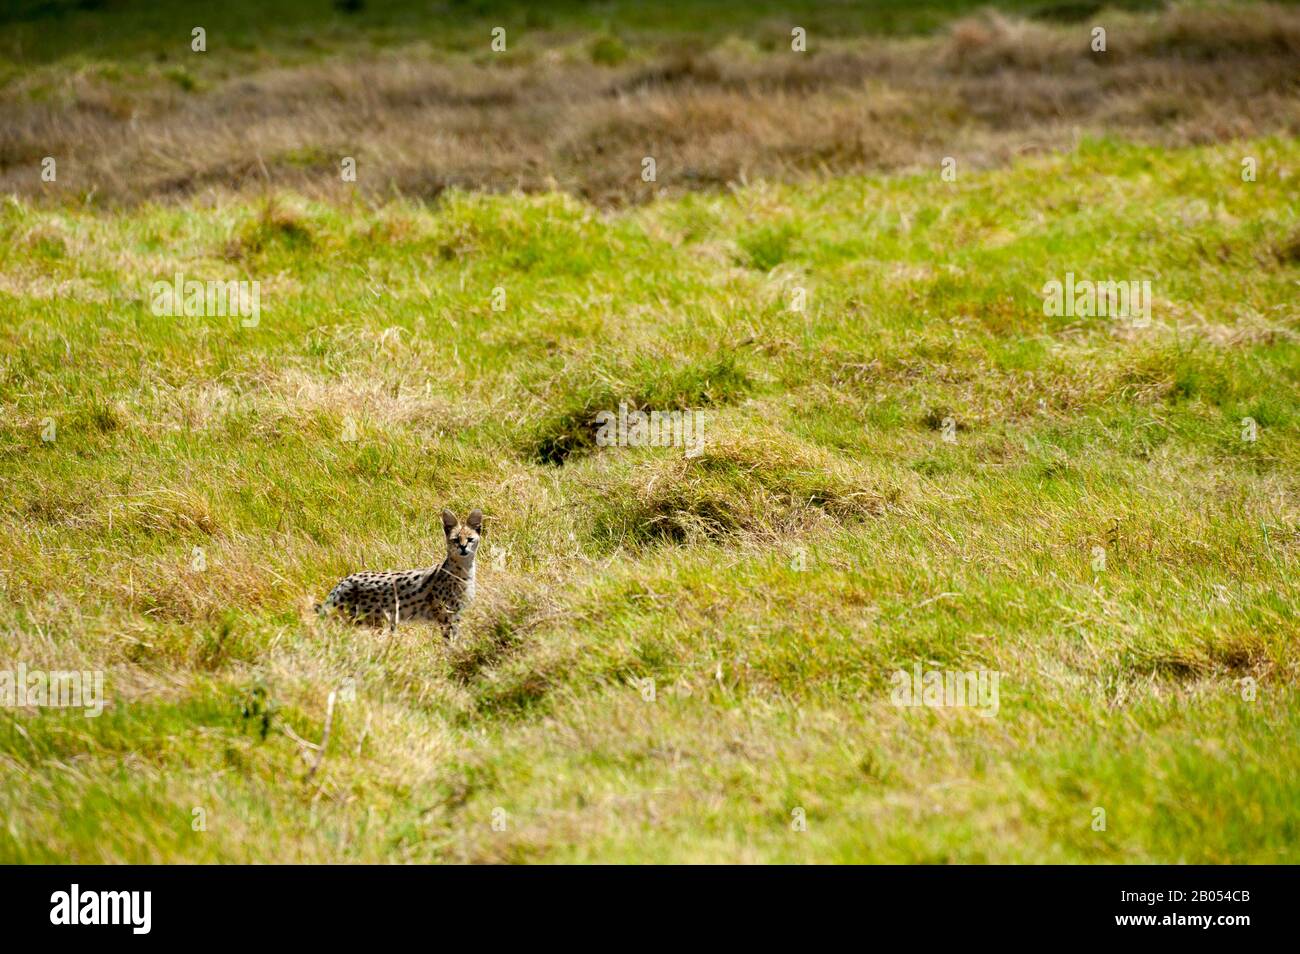 Serval cat (Leptailurus serval) hunting in grass for small animals in Amboseli National Park in Kenya Stock Photo